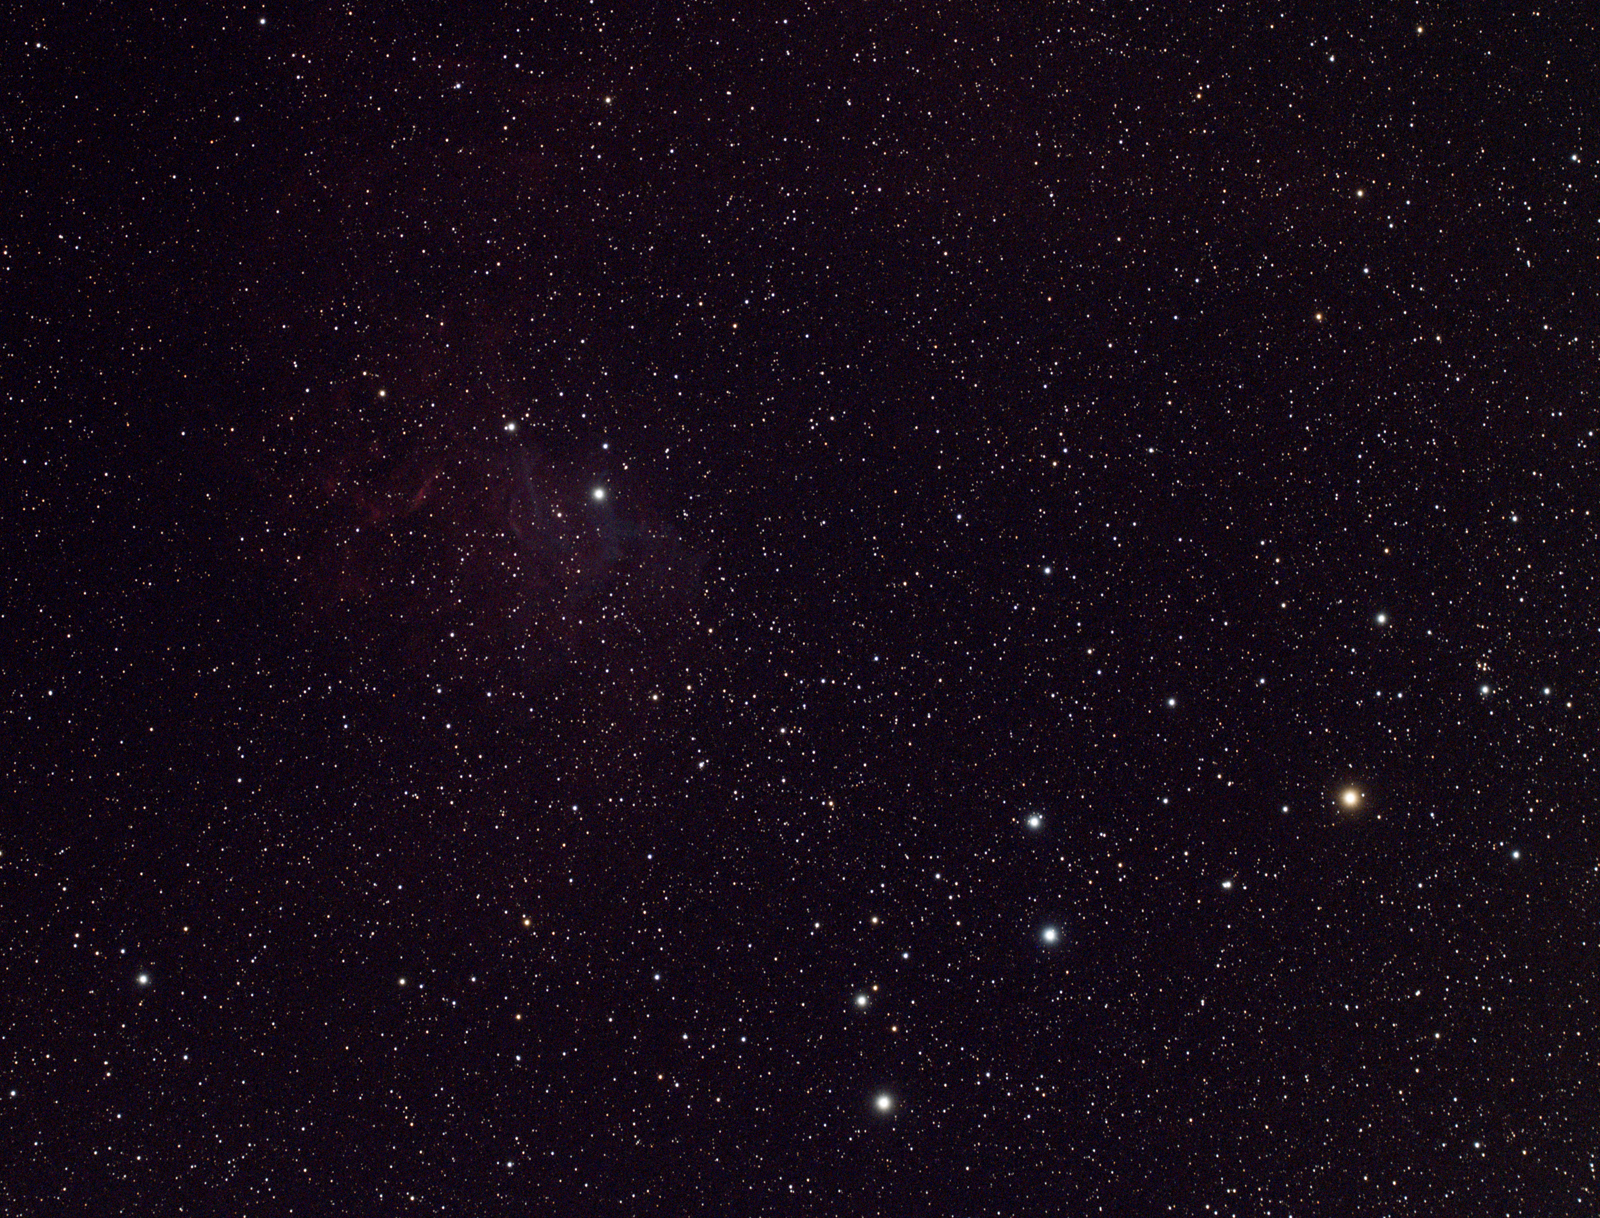 IC405 92f5 3 2600 g350 br10 nofilter 40F 1200S NoEdit 12202022m